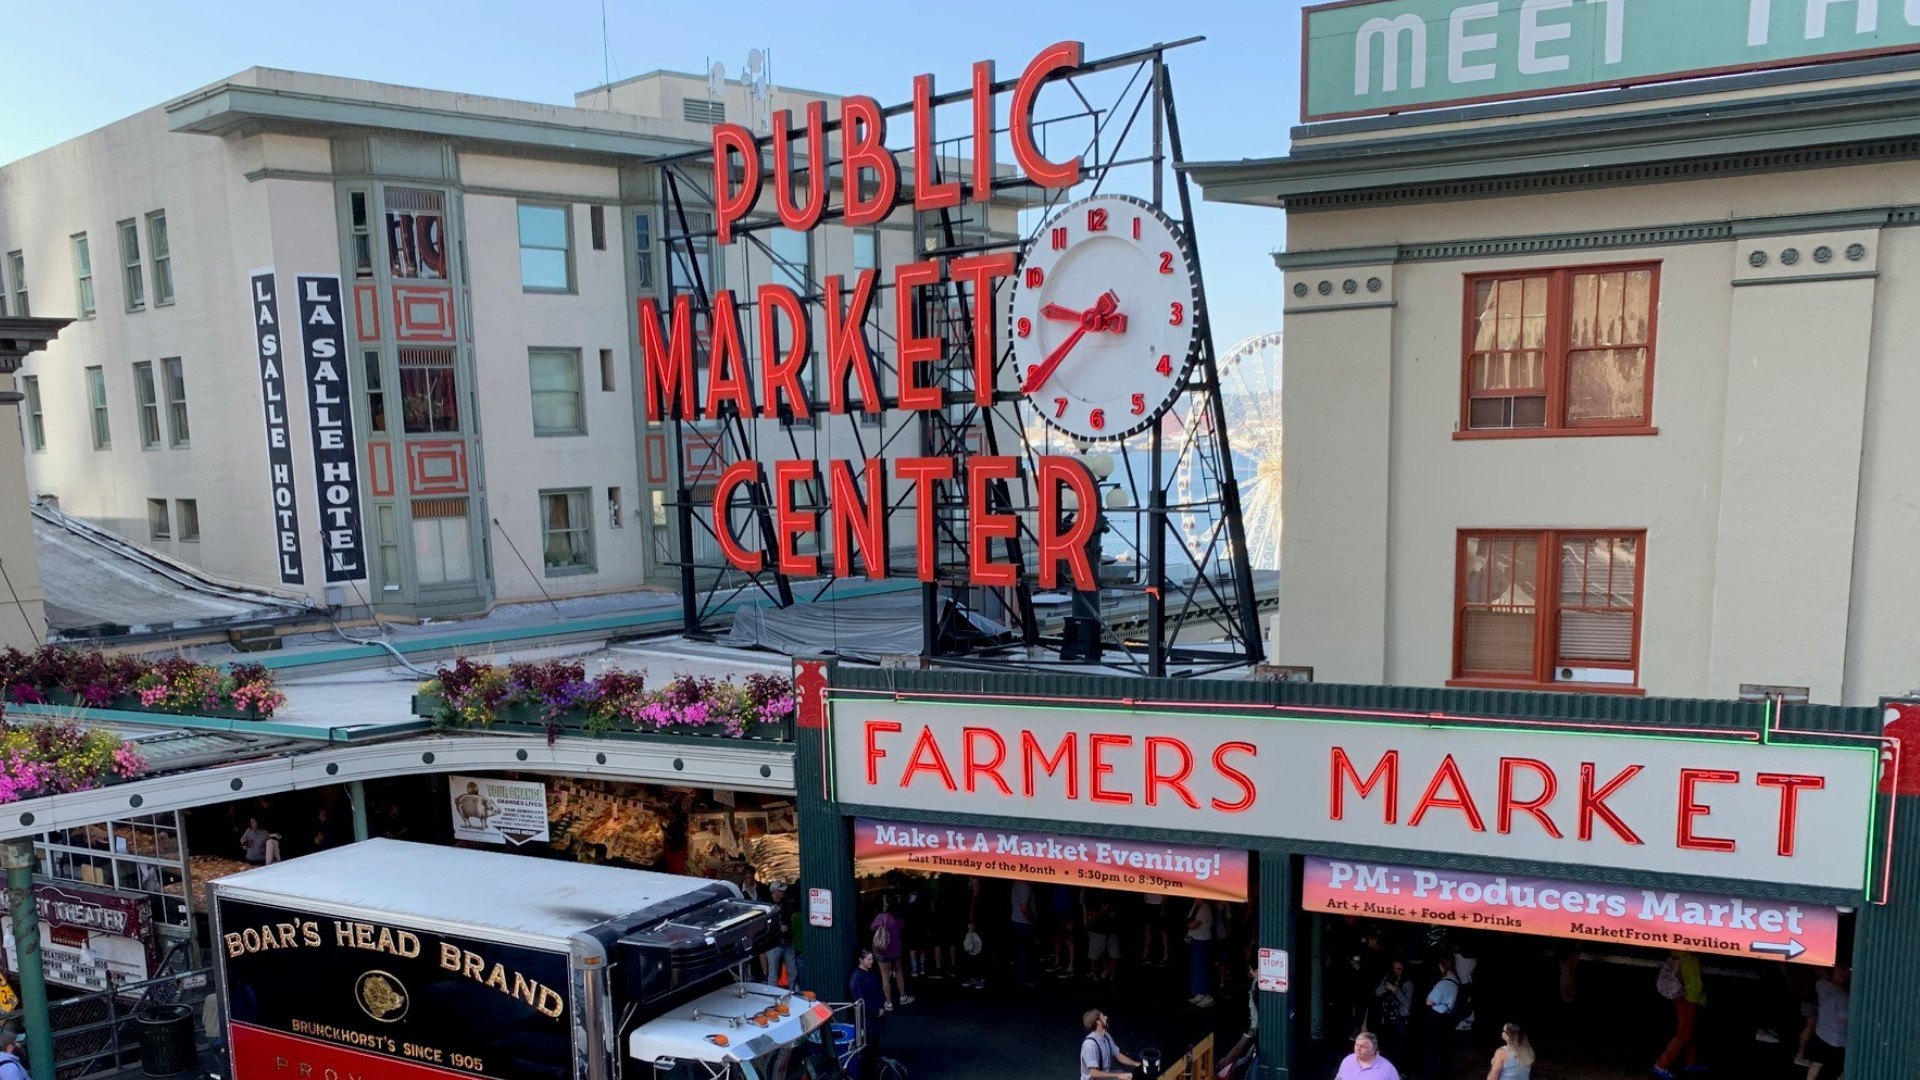 Matt's in the Market has an unbeatable location- right across from Pike Place Market. Sponsored by Matt's in the Market.